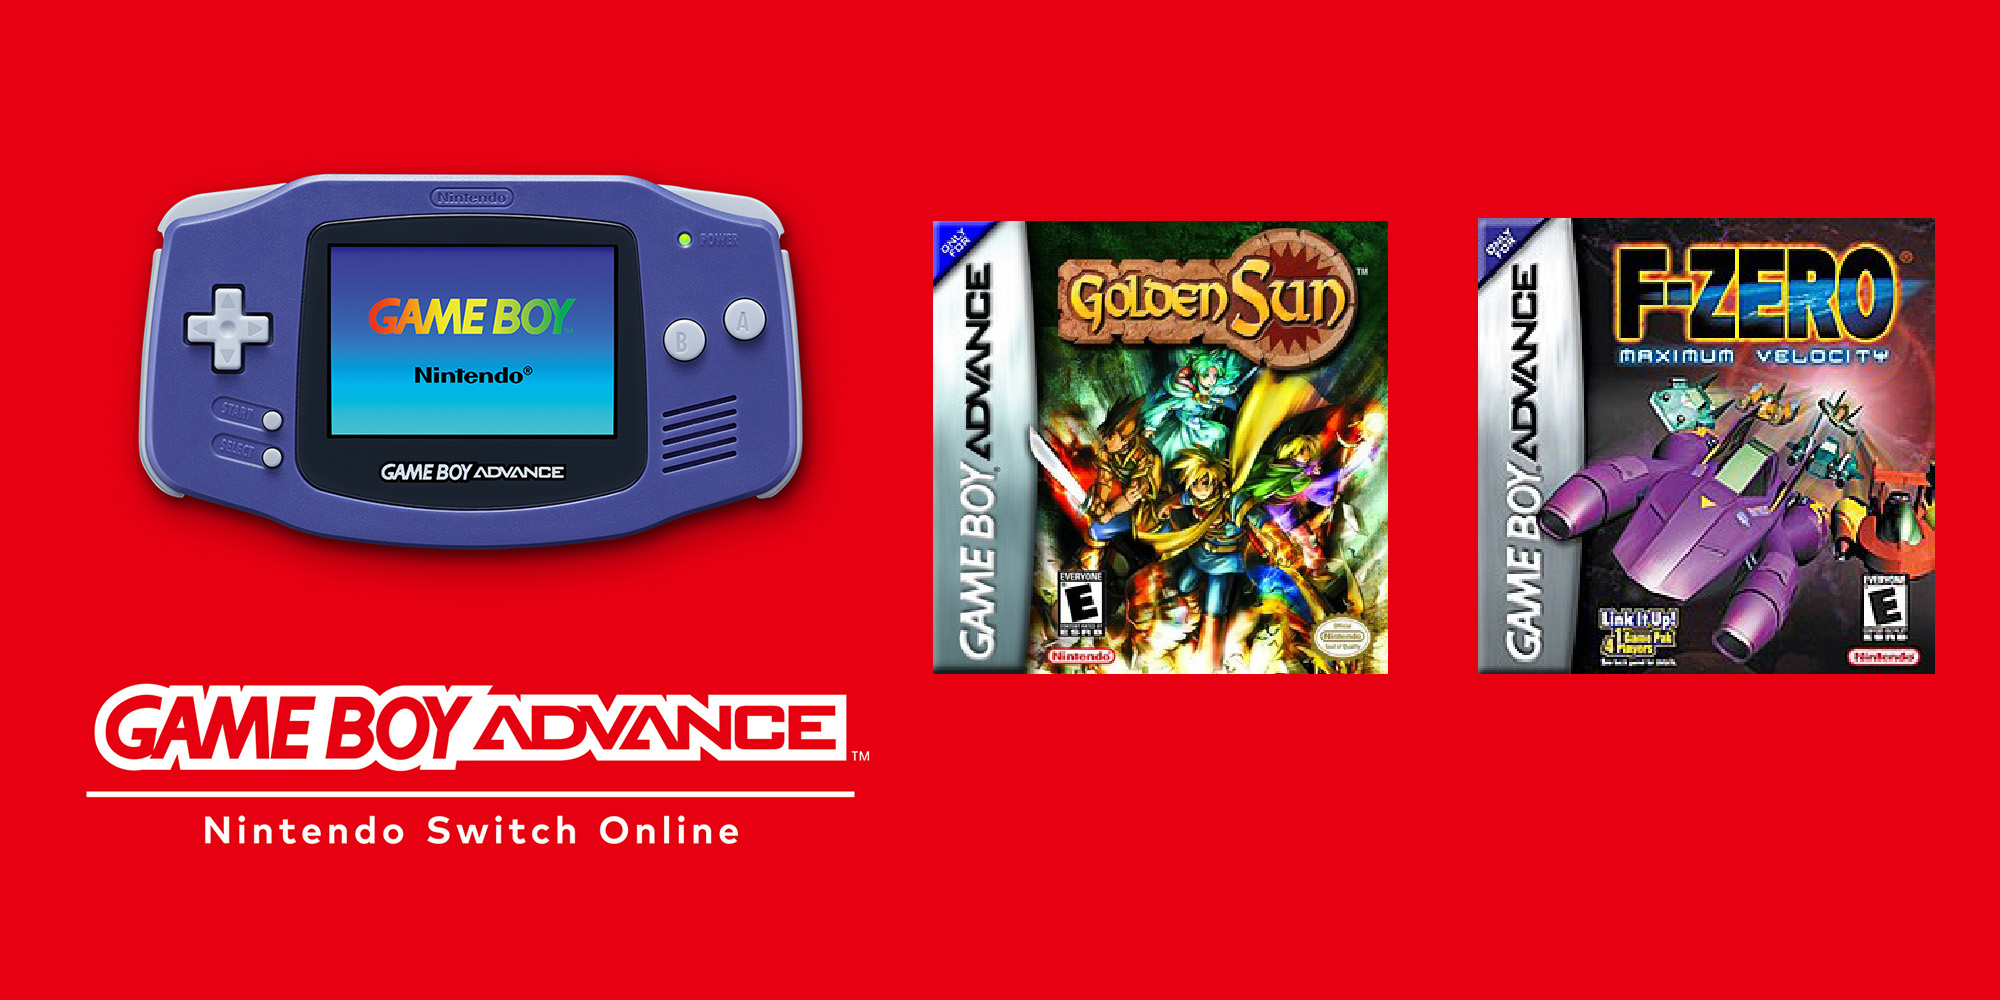 Game Boy And Game Boy Advance Games Come To Switch Today - Game Informer